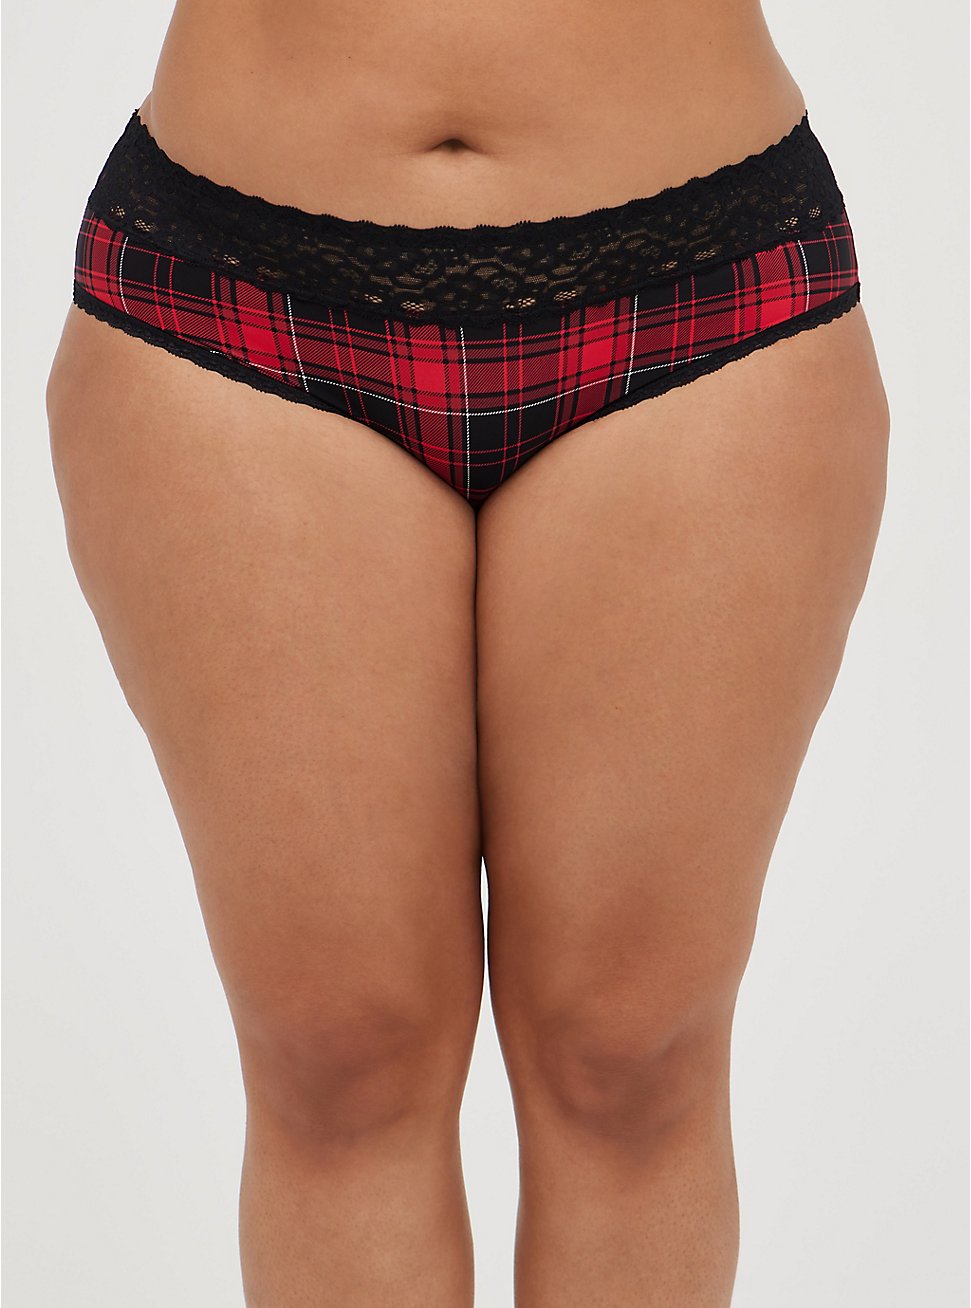 Plus Size Second Skin Hipster Panty - Wide Lace Plaid Red, NY PLAID, hi-res